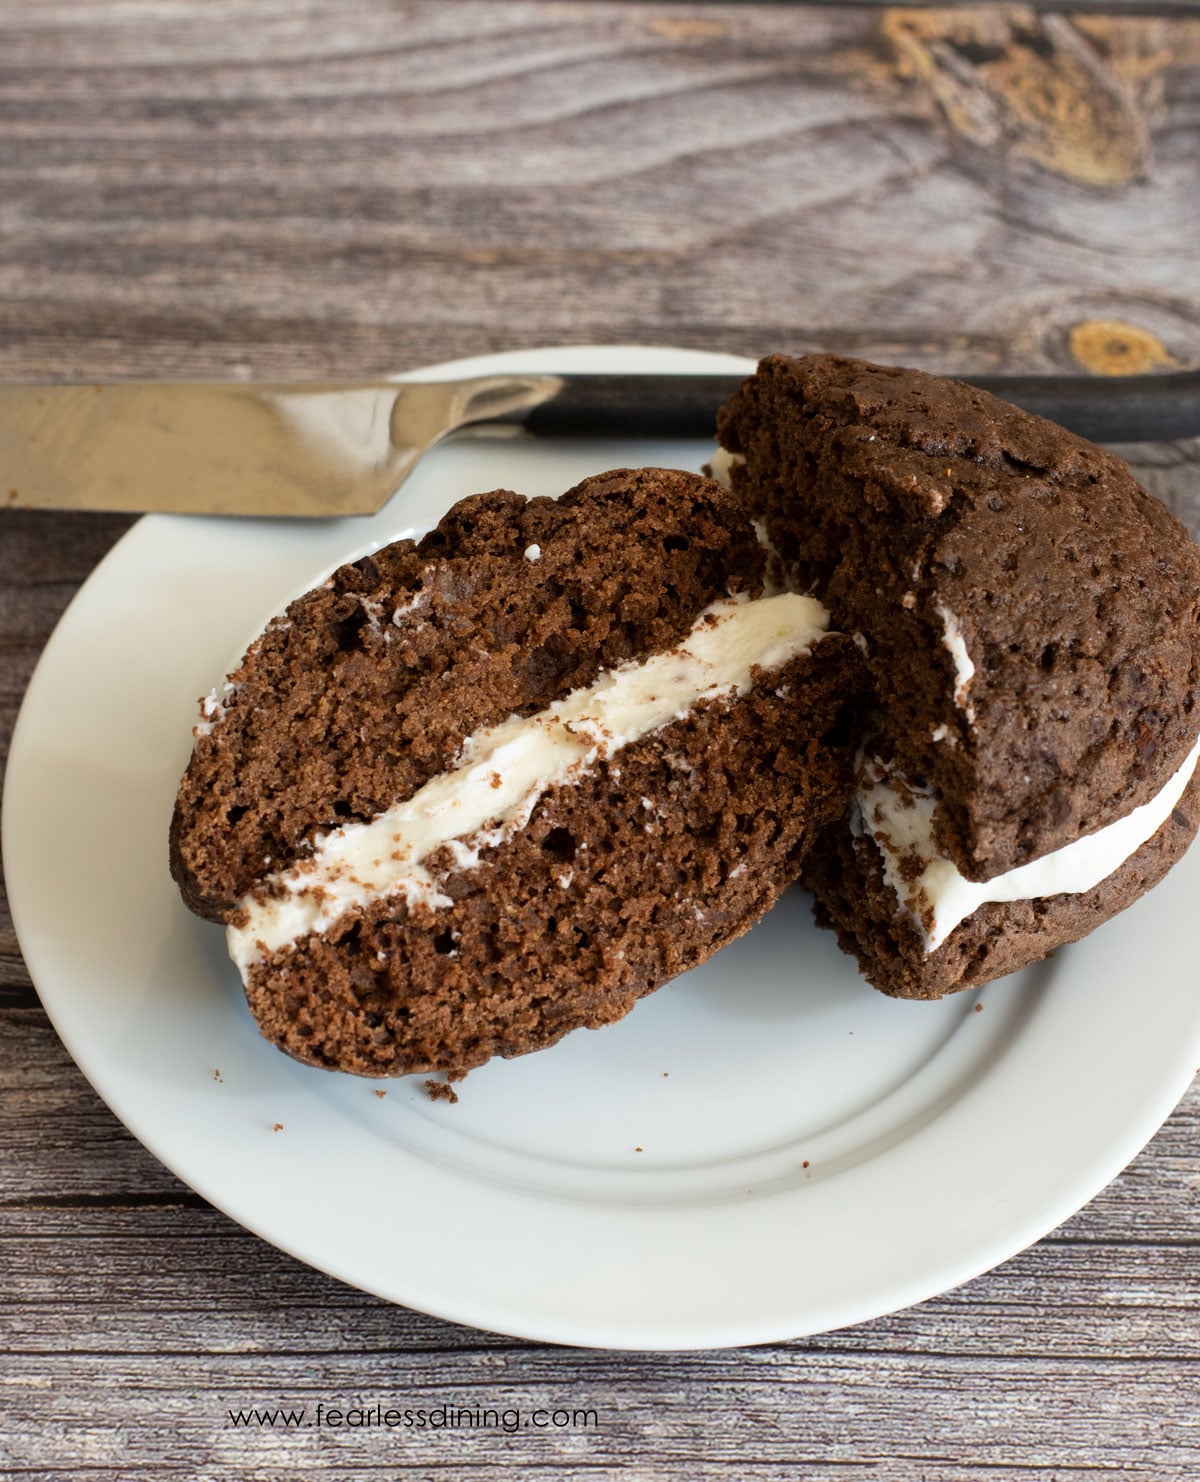 A whoopie pie on a plate that was cut in half.